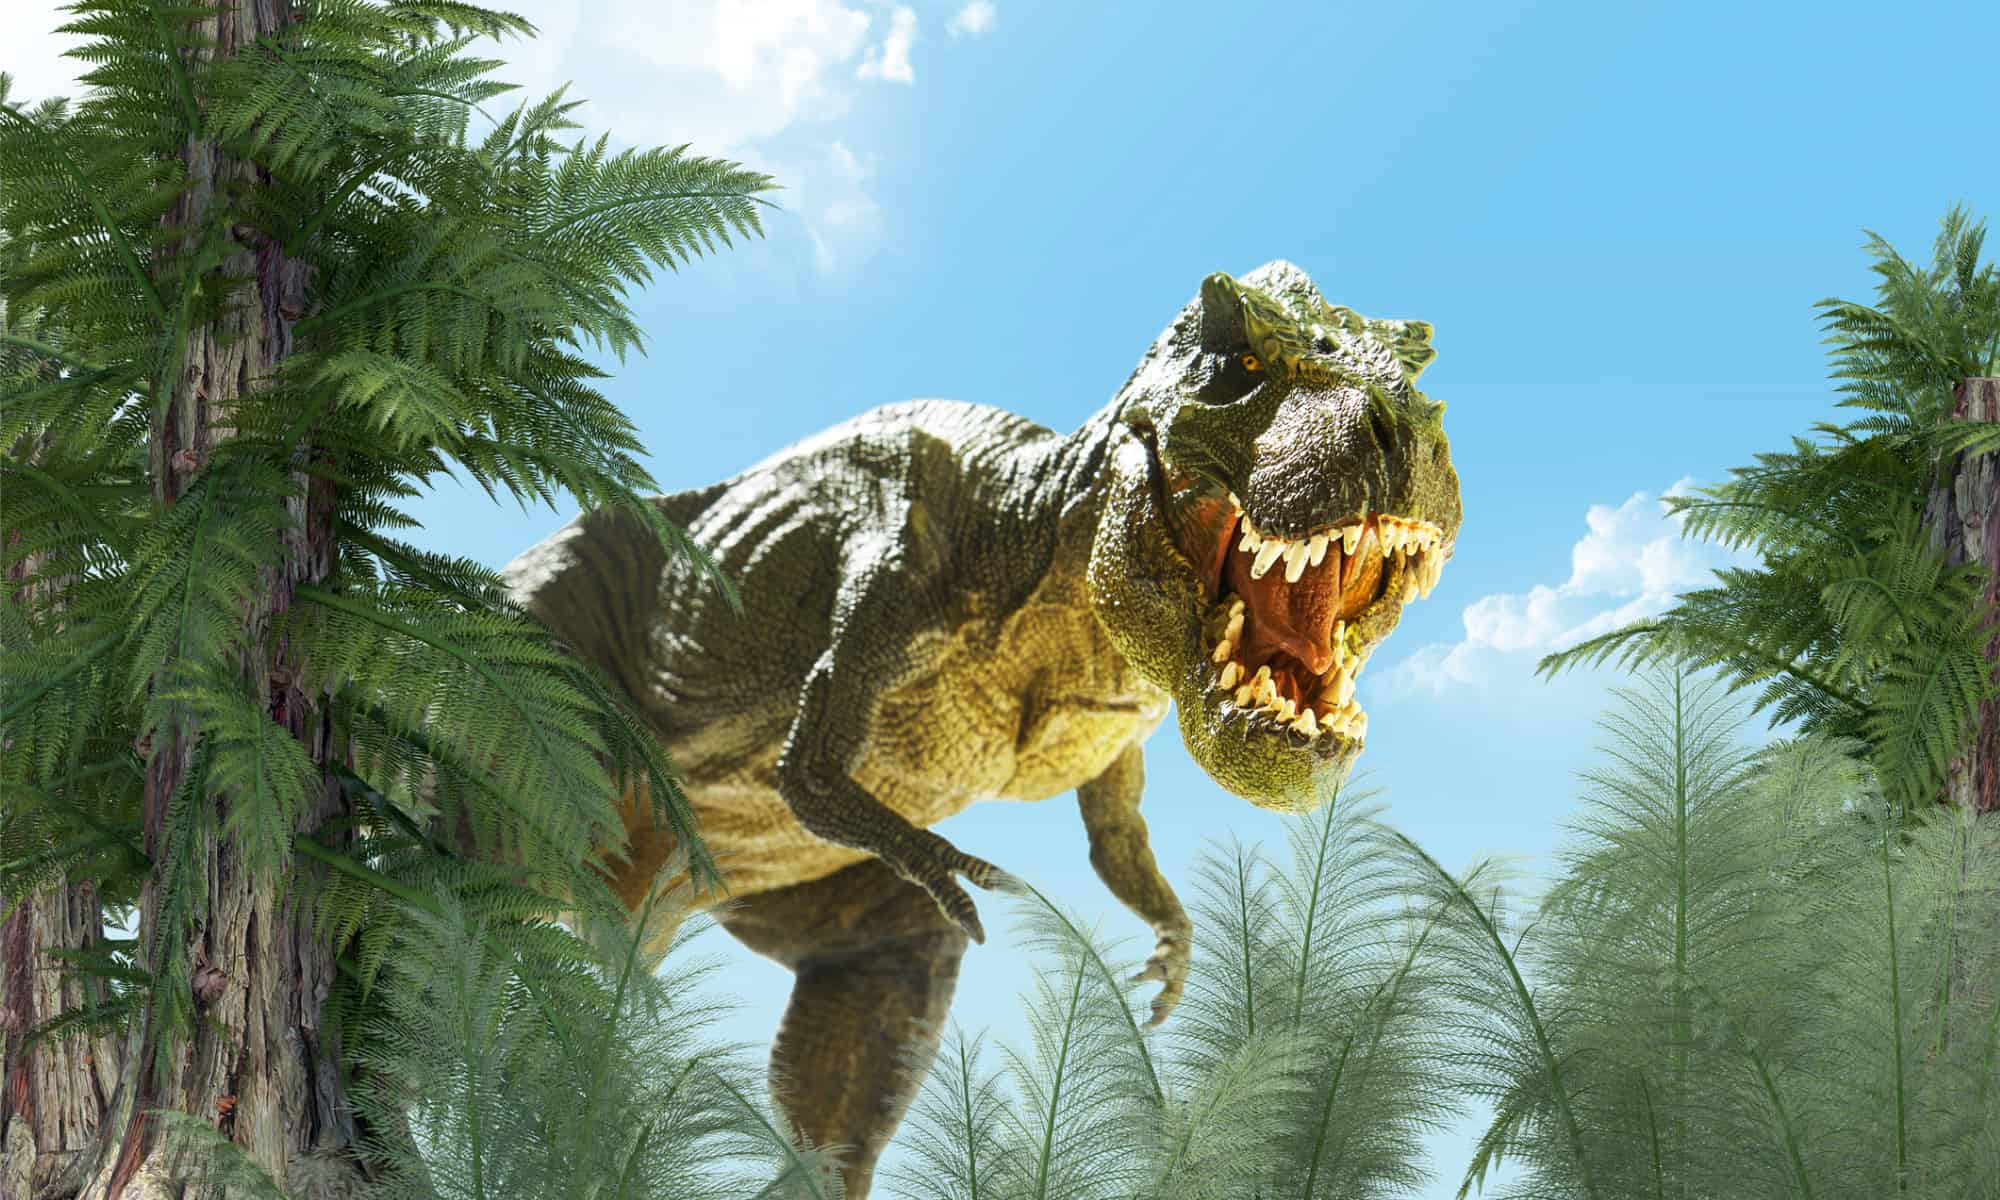 3D rendering of a T-rex in a forest of palm-like trees